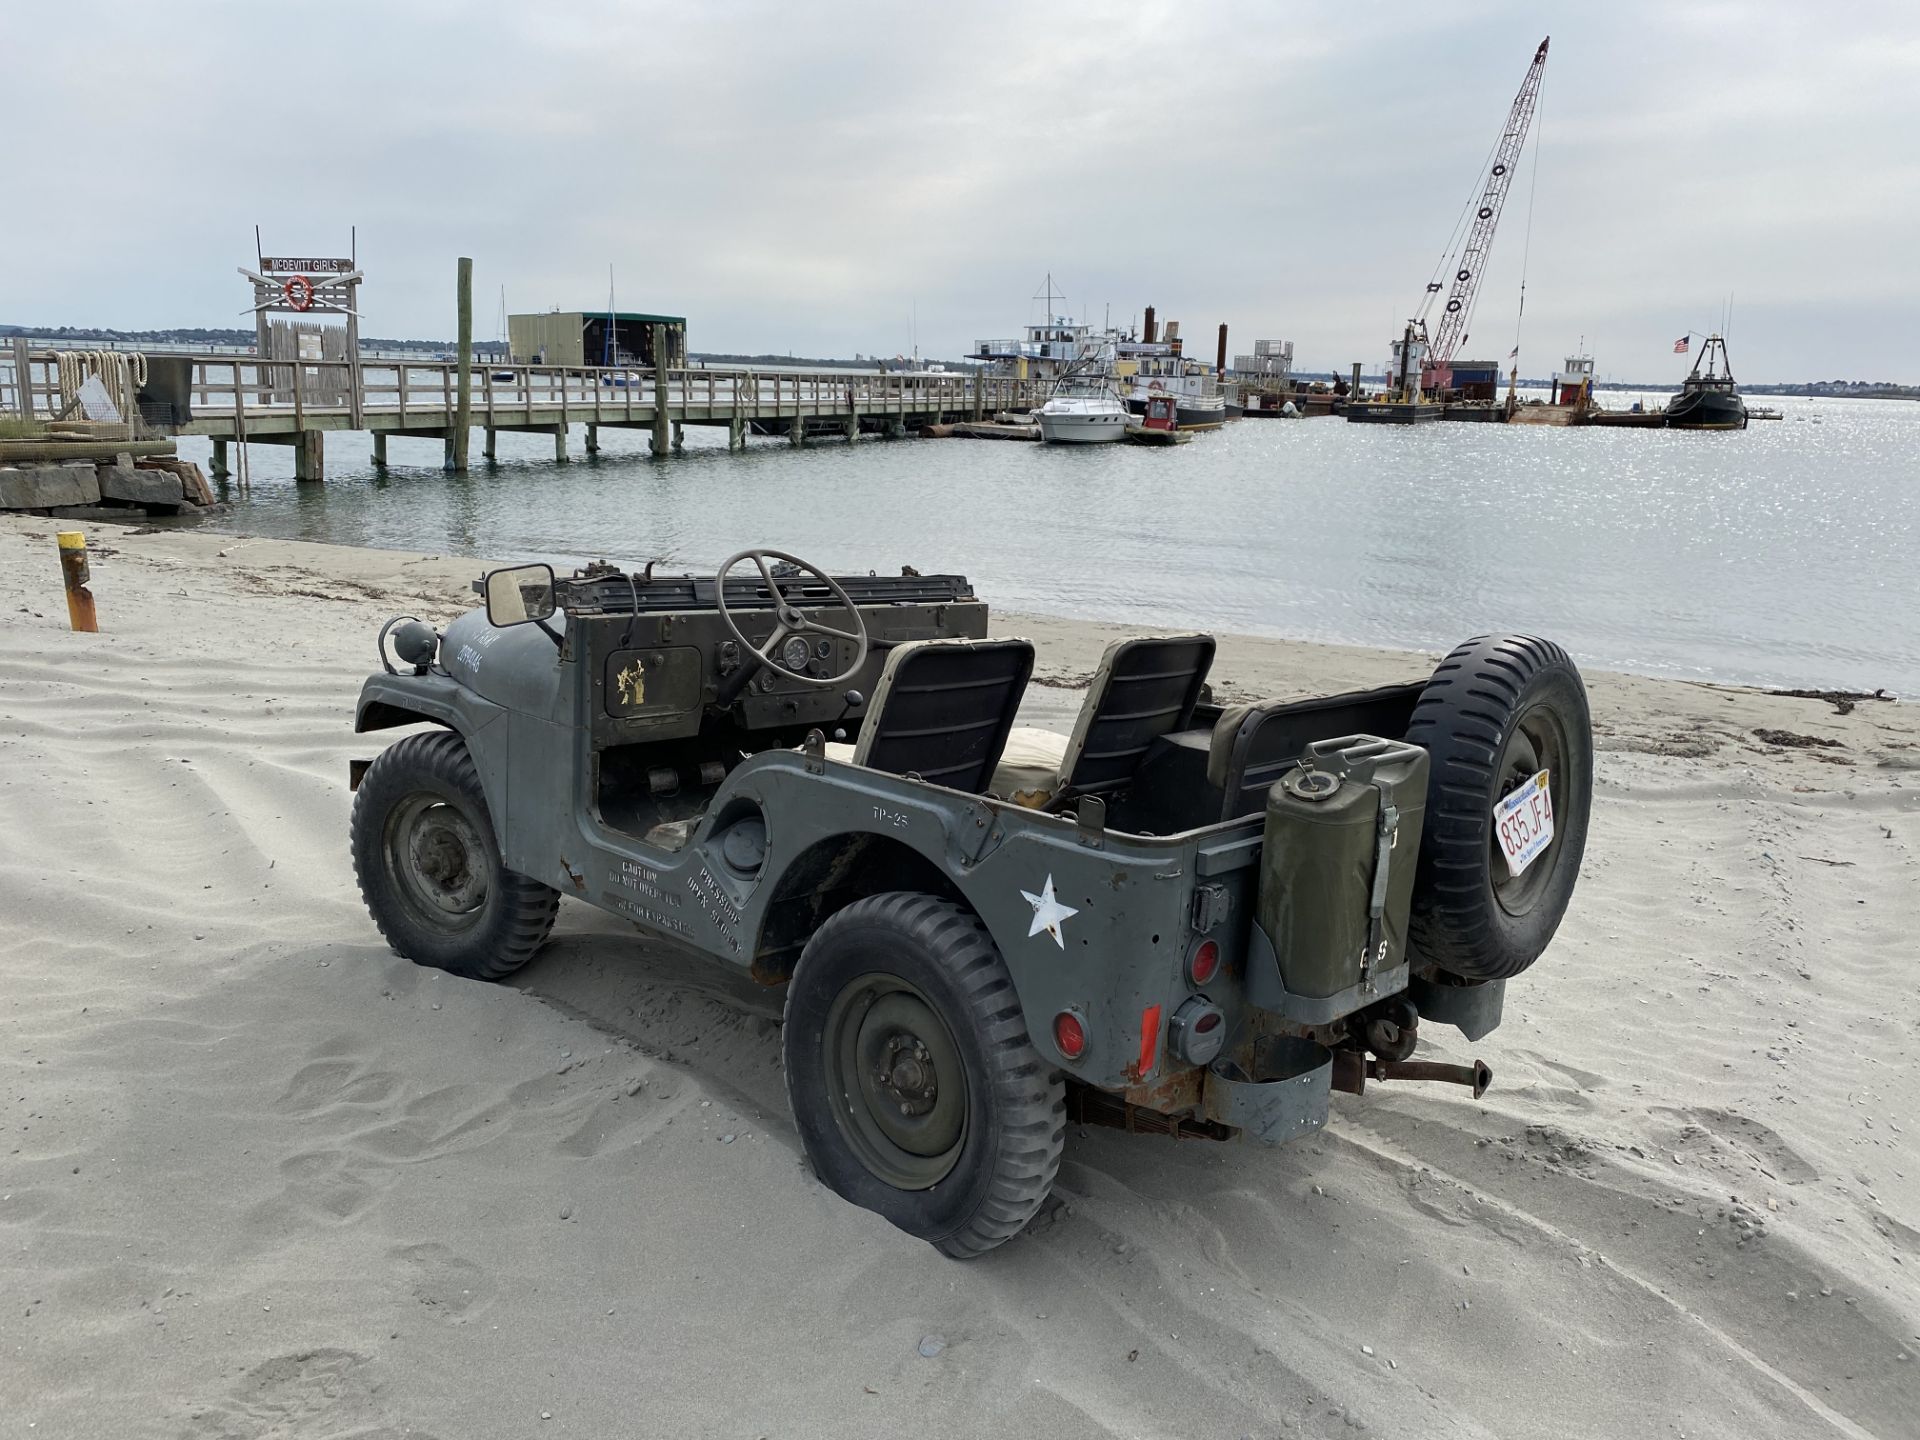 1953 Willys Army Jeep, M38A1, 4x4, 4 Cylinder Gas, 1/4 Ton, Good Glass, 2 Canopies(1 Original) Runs, - Image 2 of 17